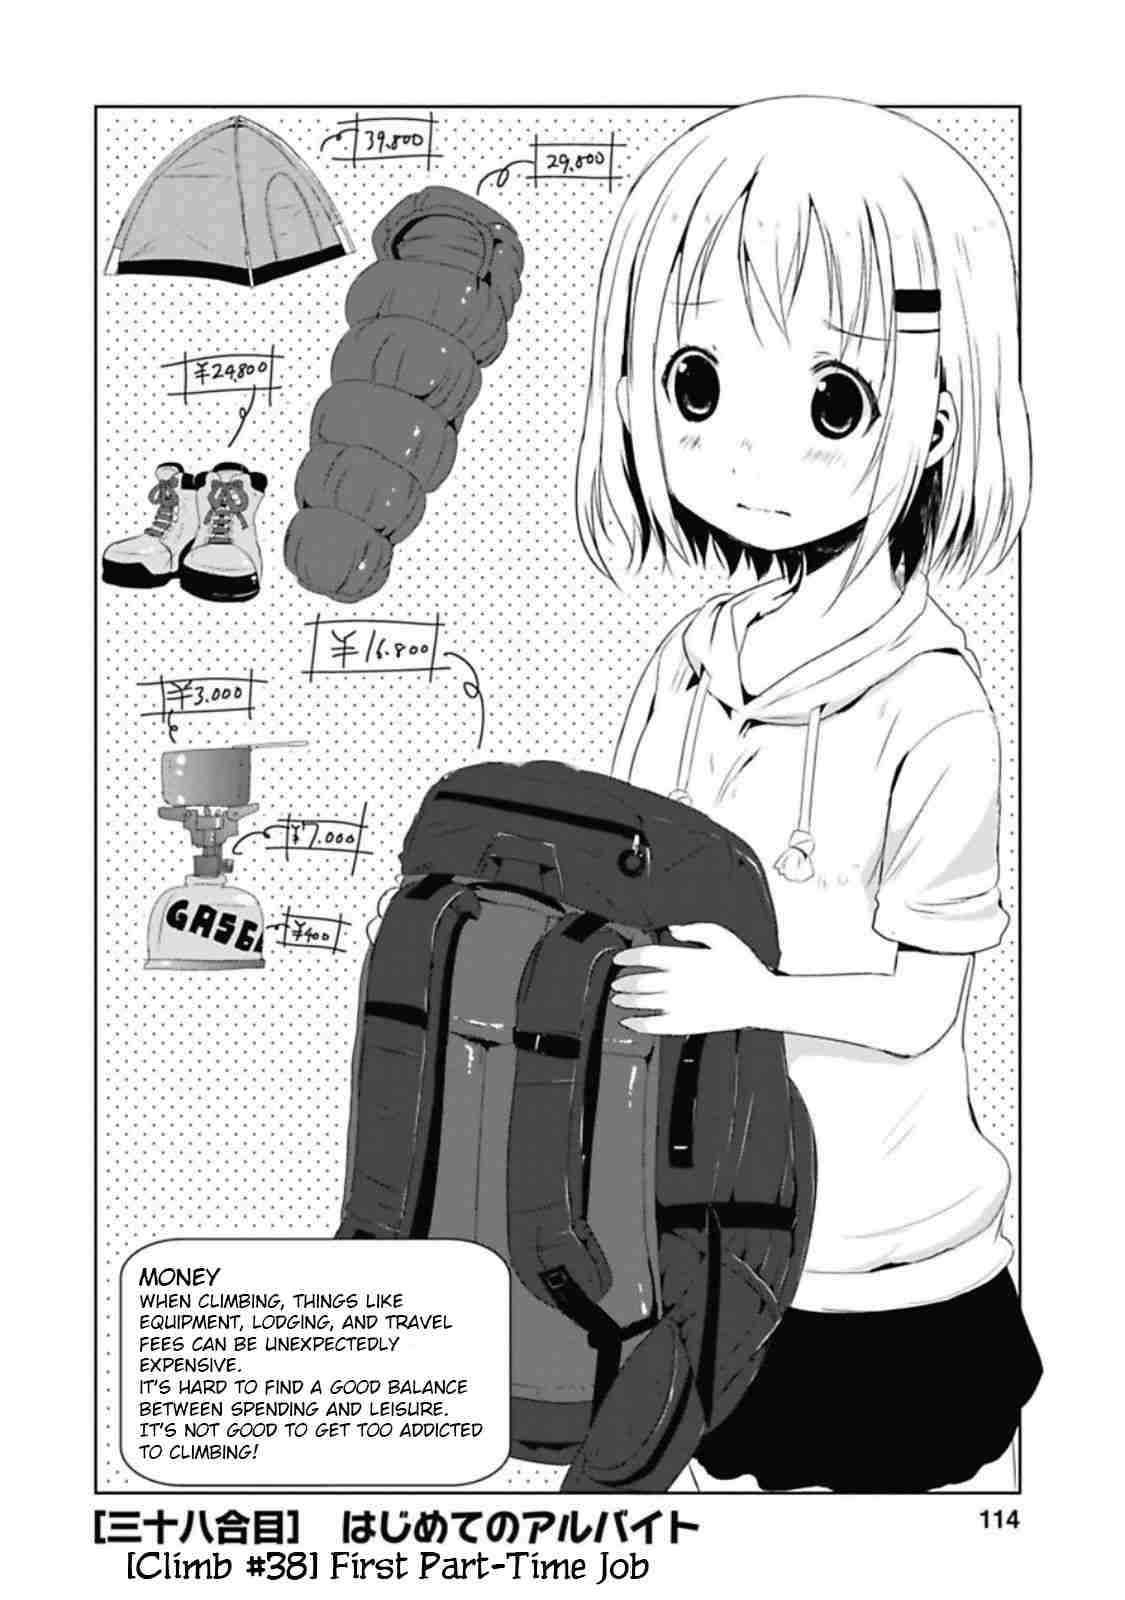 Yama no Susume Vol. 5 Ch. 38 First Part Time Job